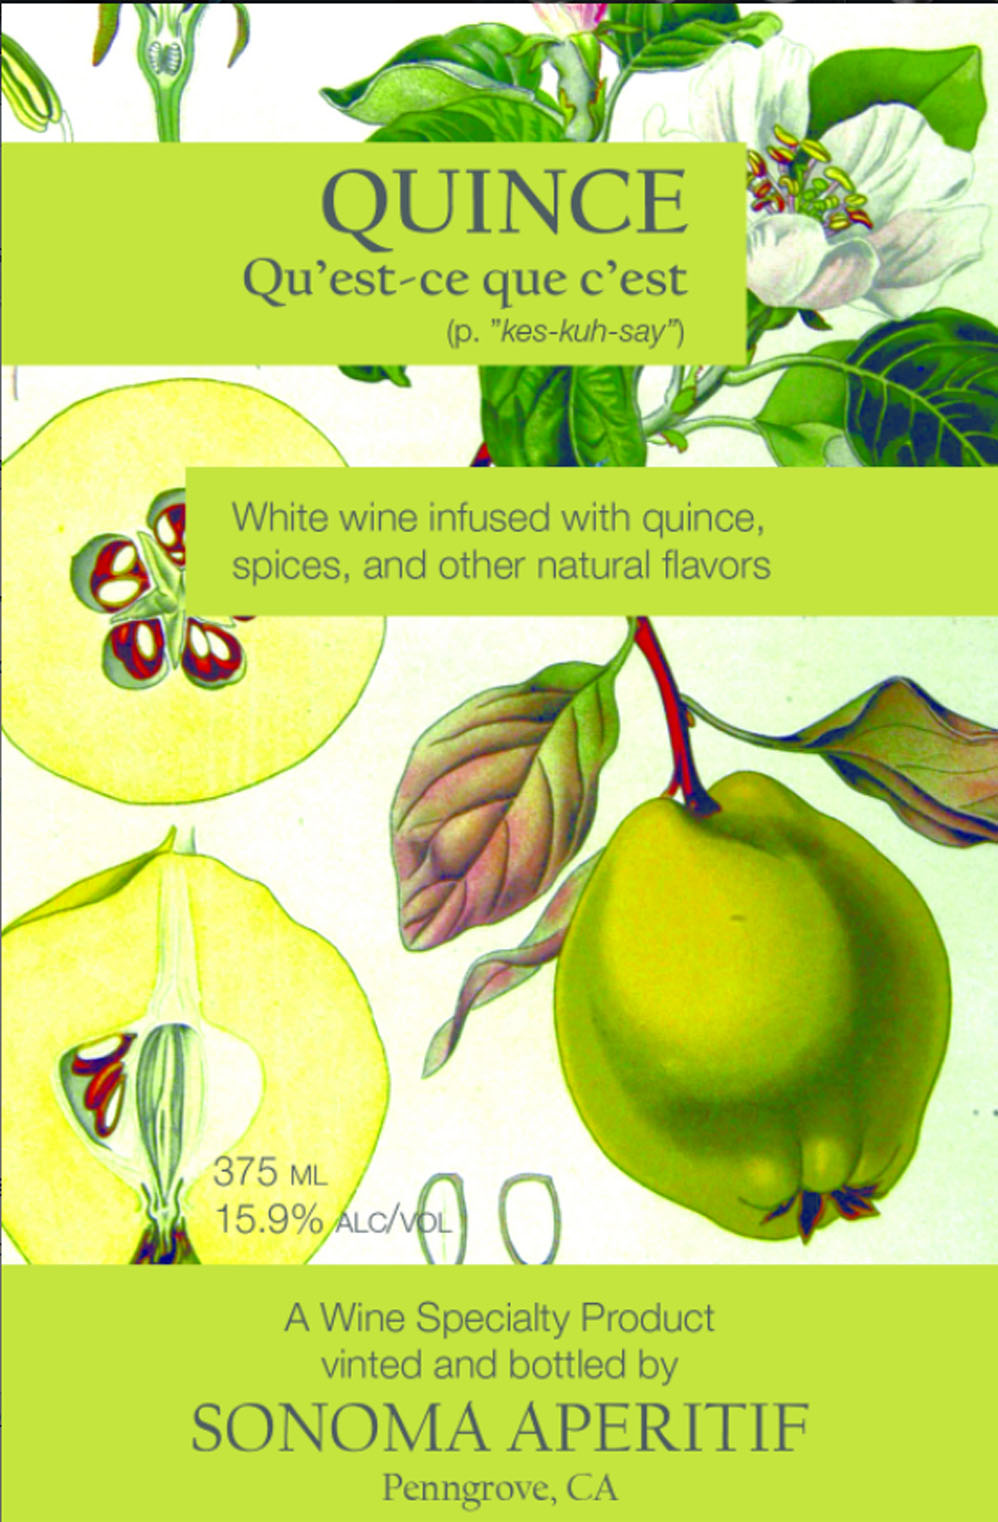 Quince label